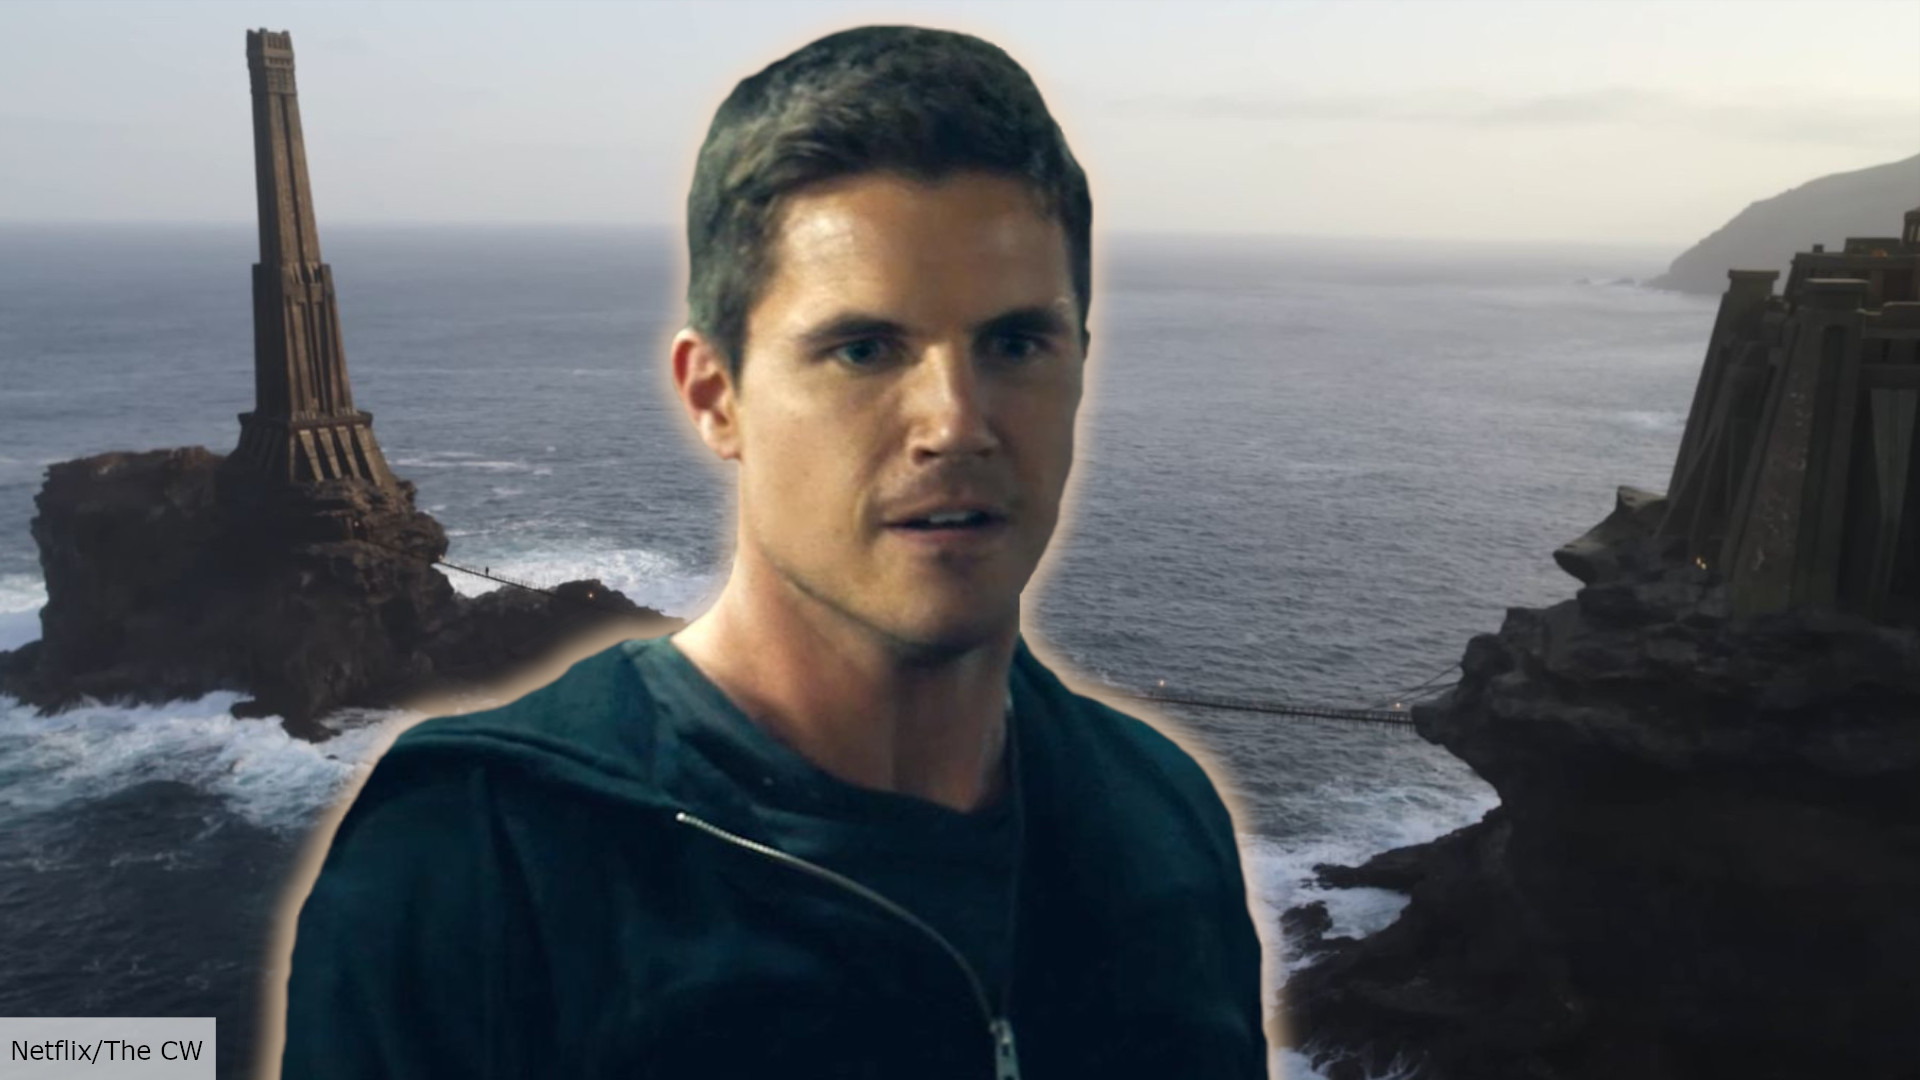 Who Is Gallatin in The Witcher Season 3? Robbie Amell's Character